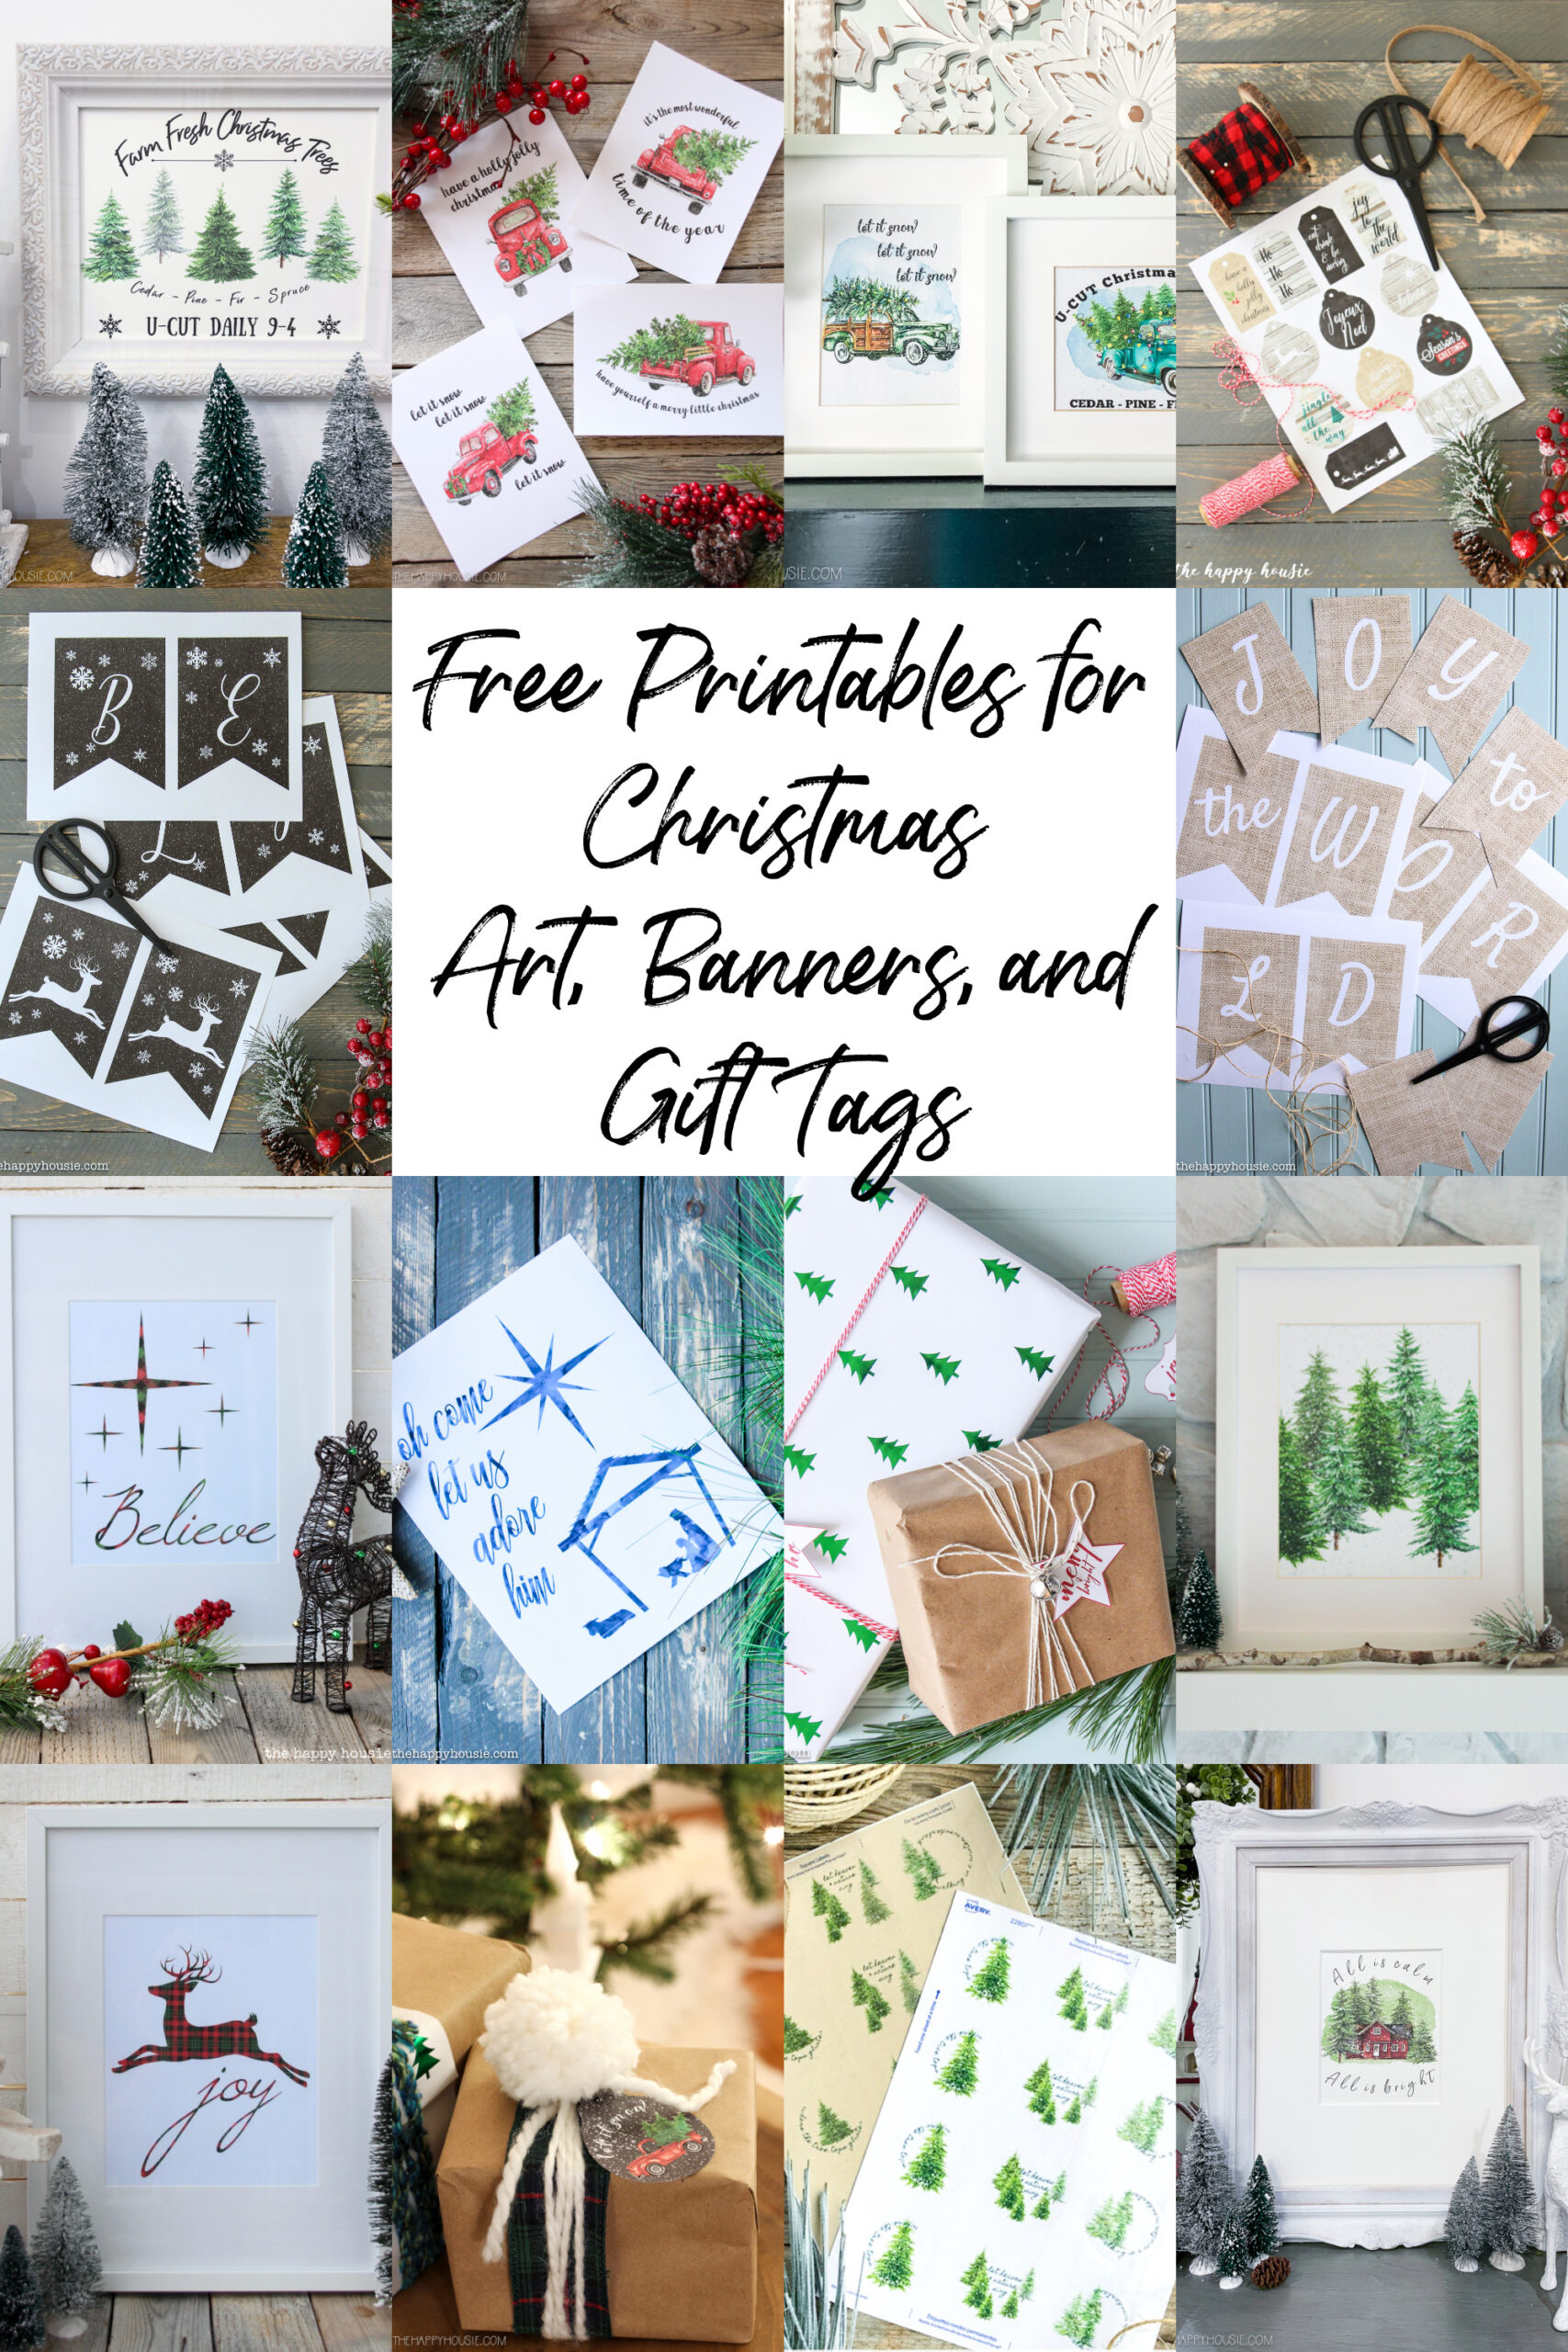 a collage image featuring free printables for Christmas including art, banners, and gift tags